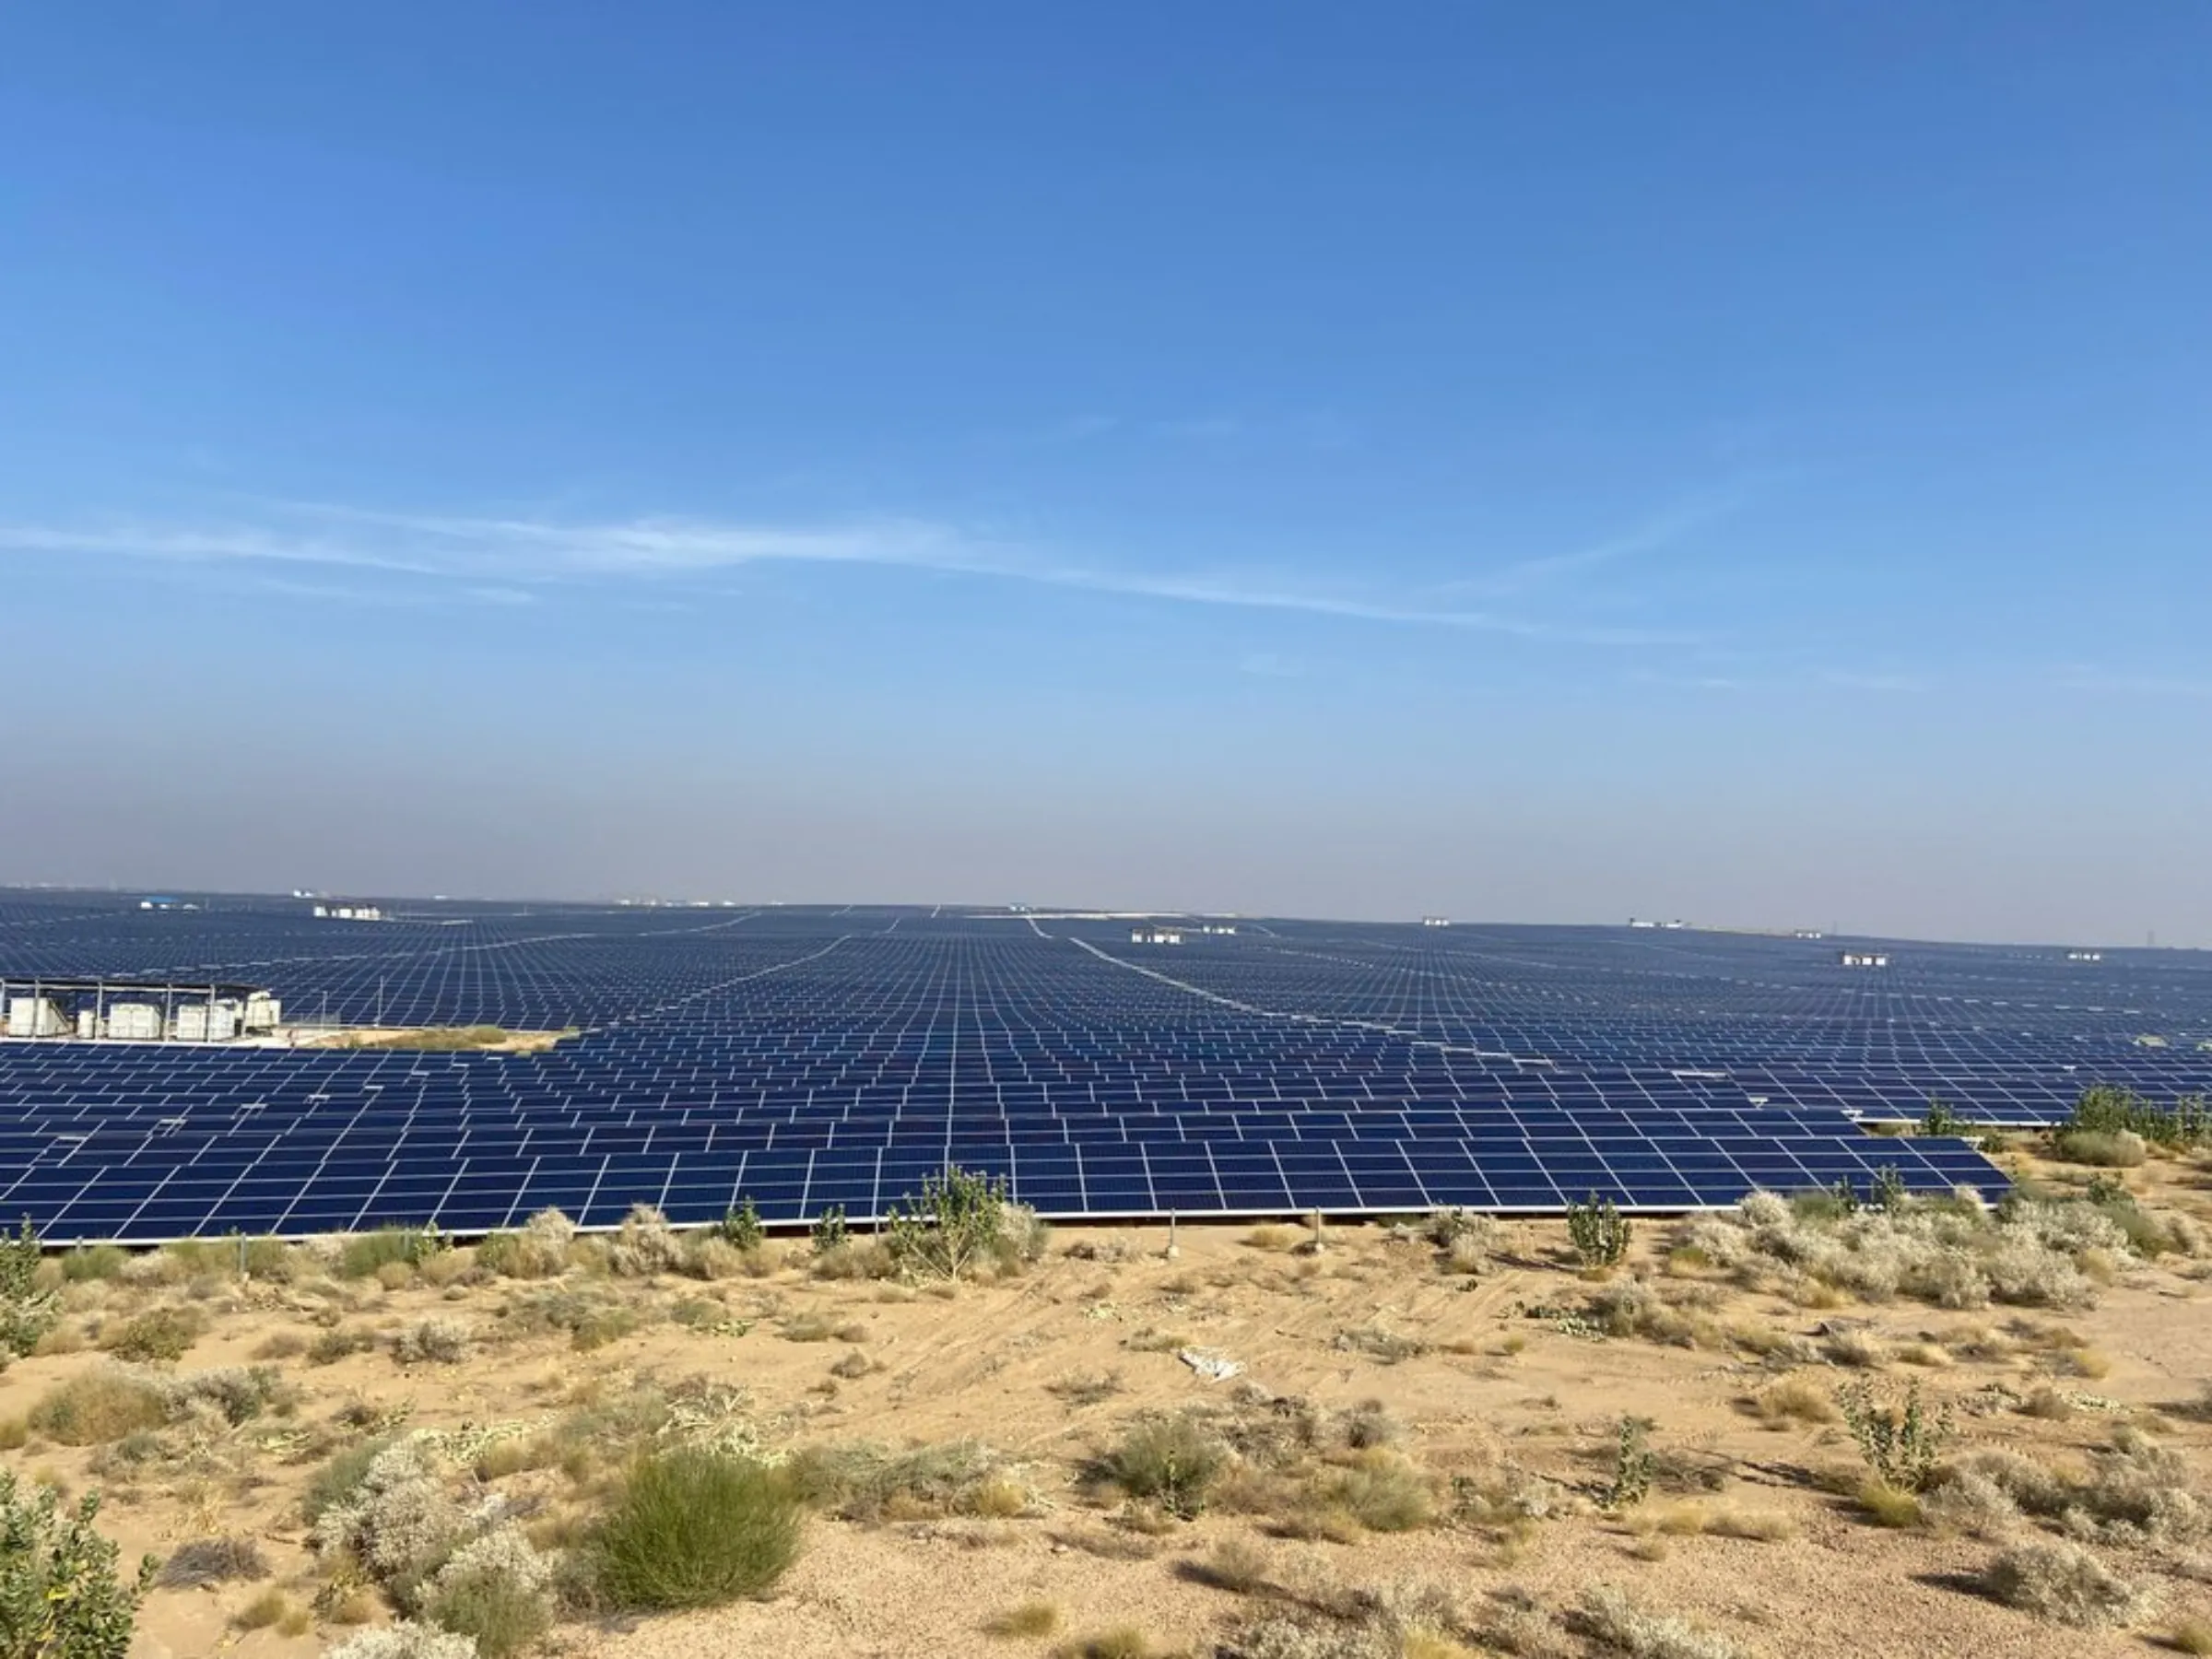 A view of the Bhadla Solar Park in Rajasthan, India, December 11, 2021.